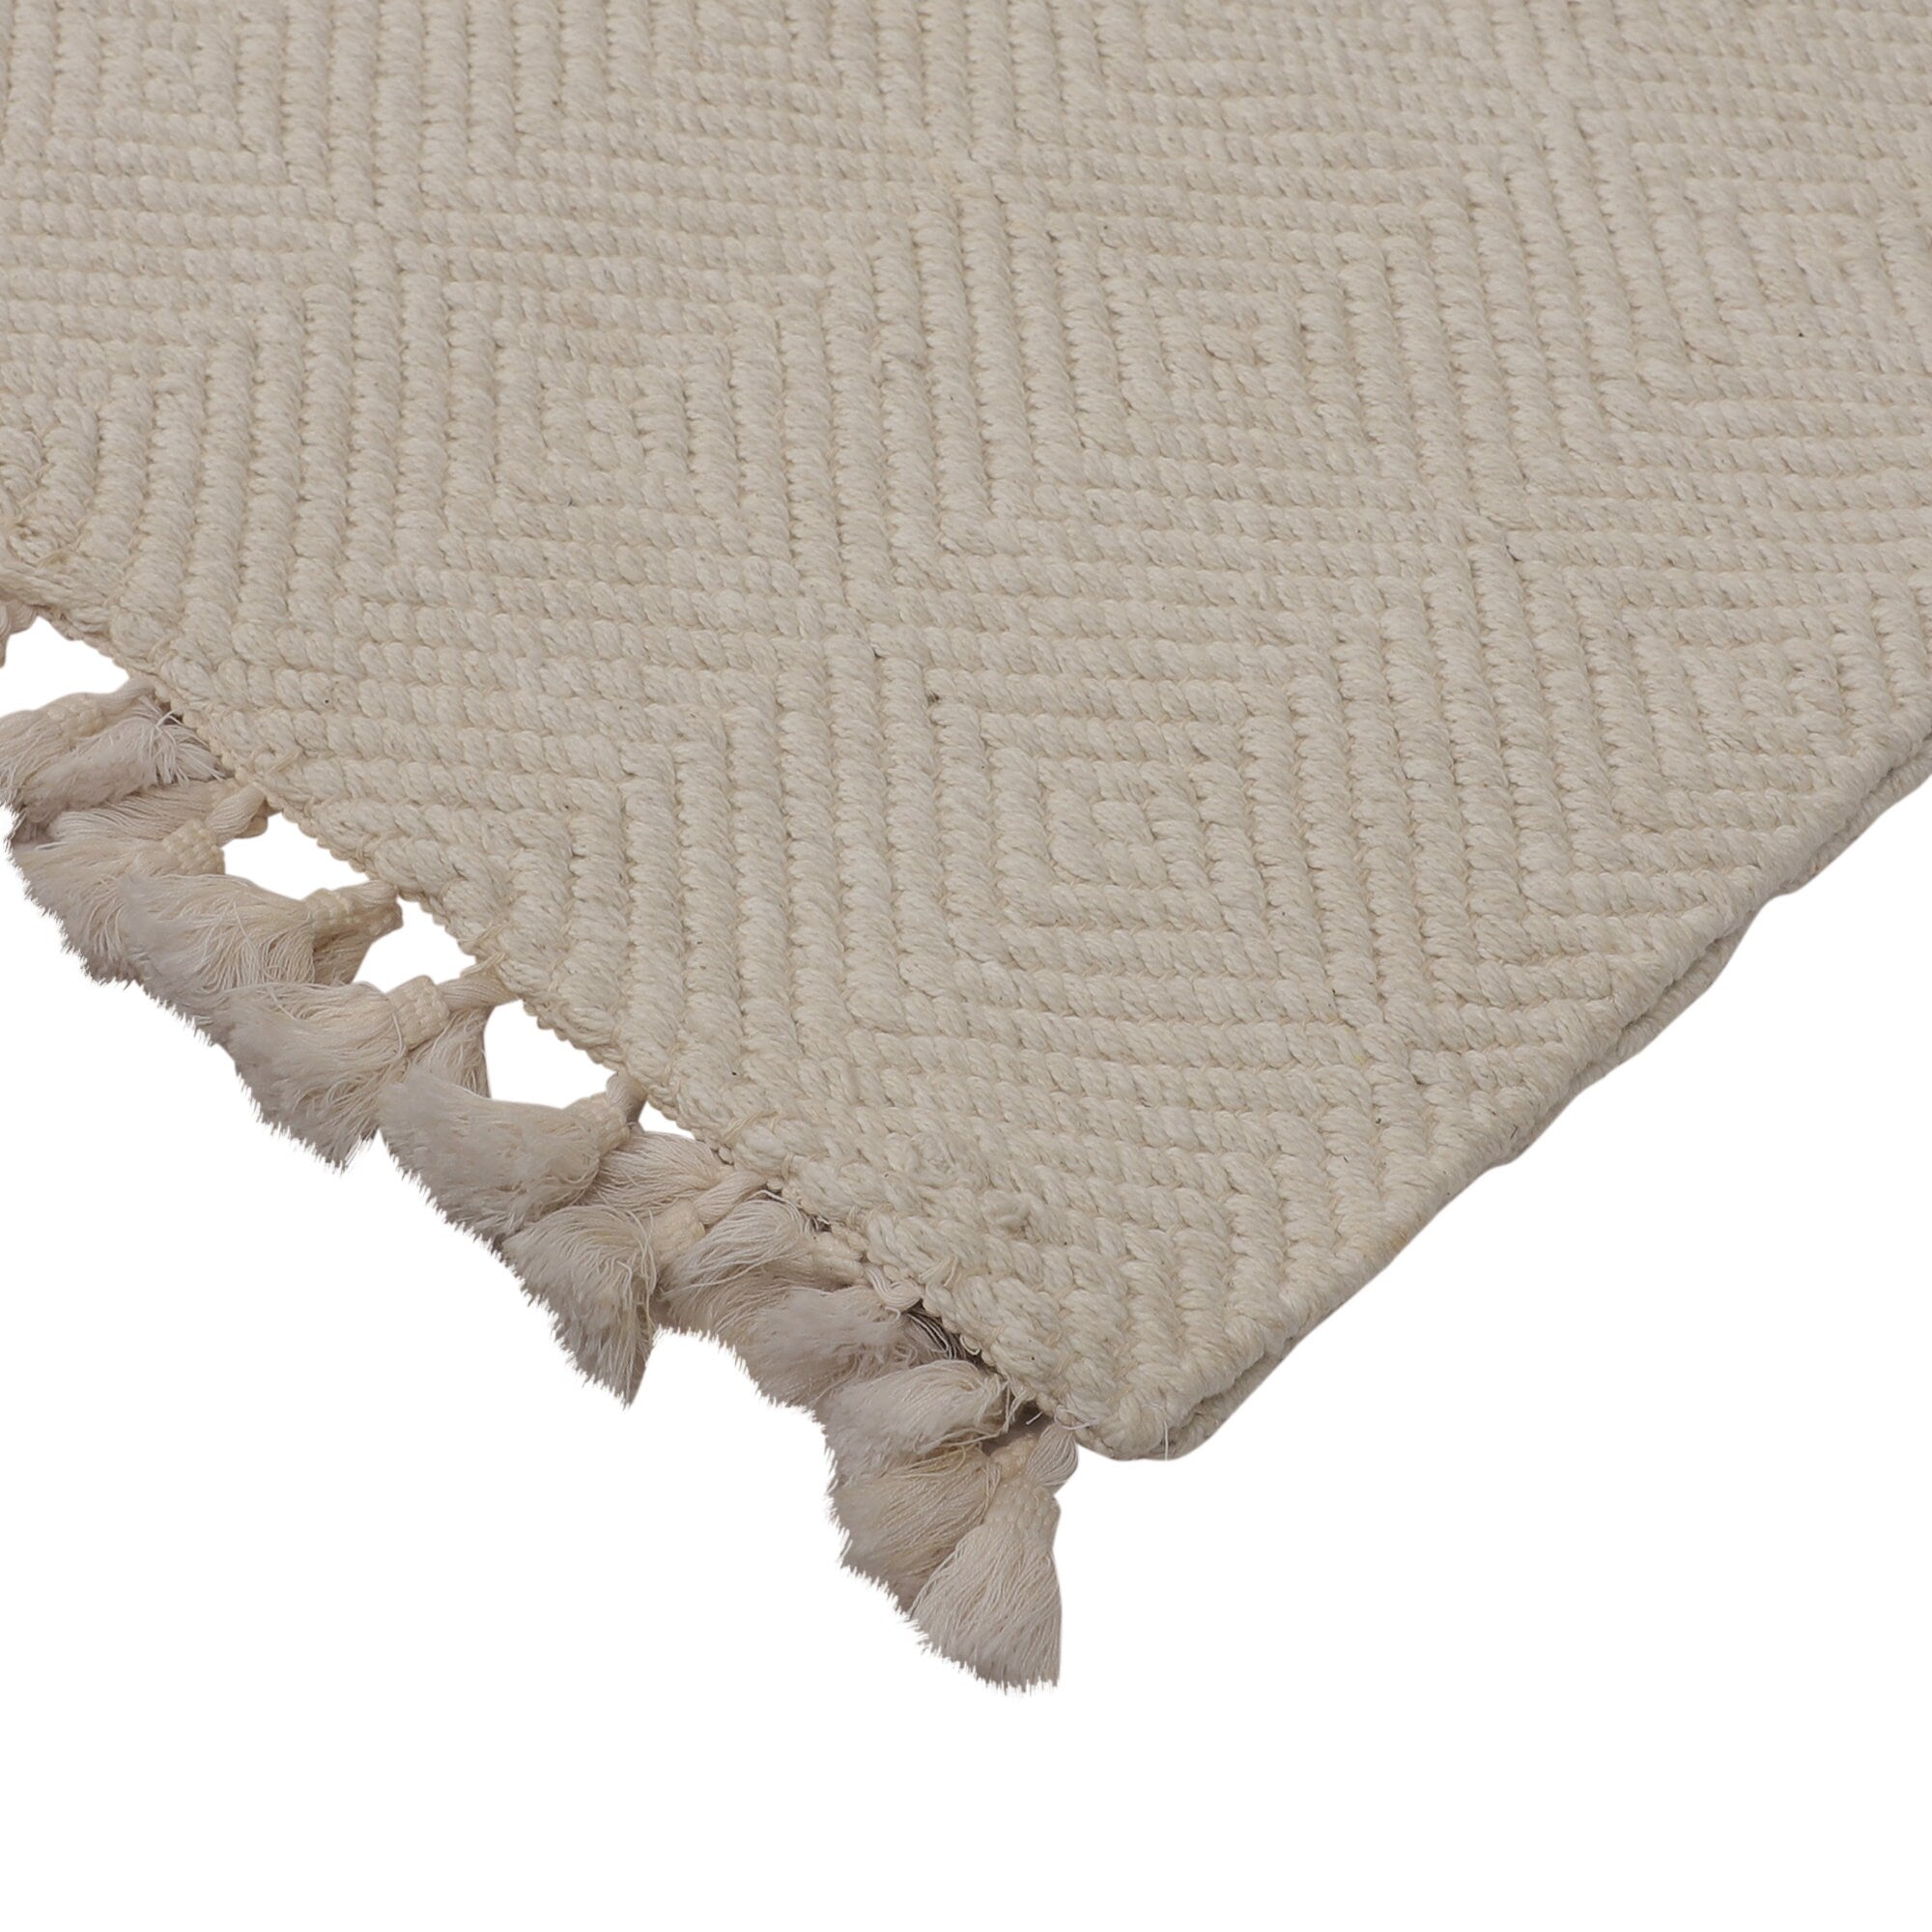 6 by 4 Feet Large Area Cotton Yoga Rug - Handwoven Natural White Cotton Rug, Organic White Ivory Cotton Rug - Cotton Carpet - Self Design